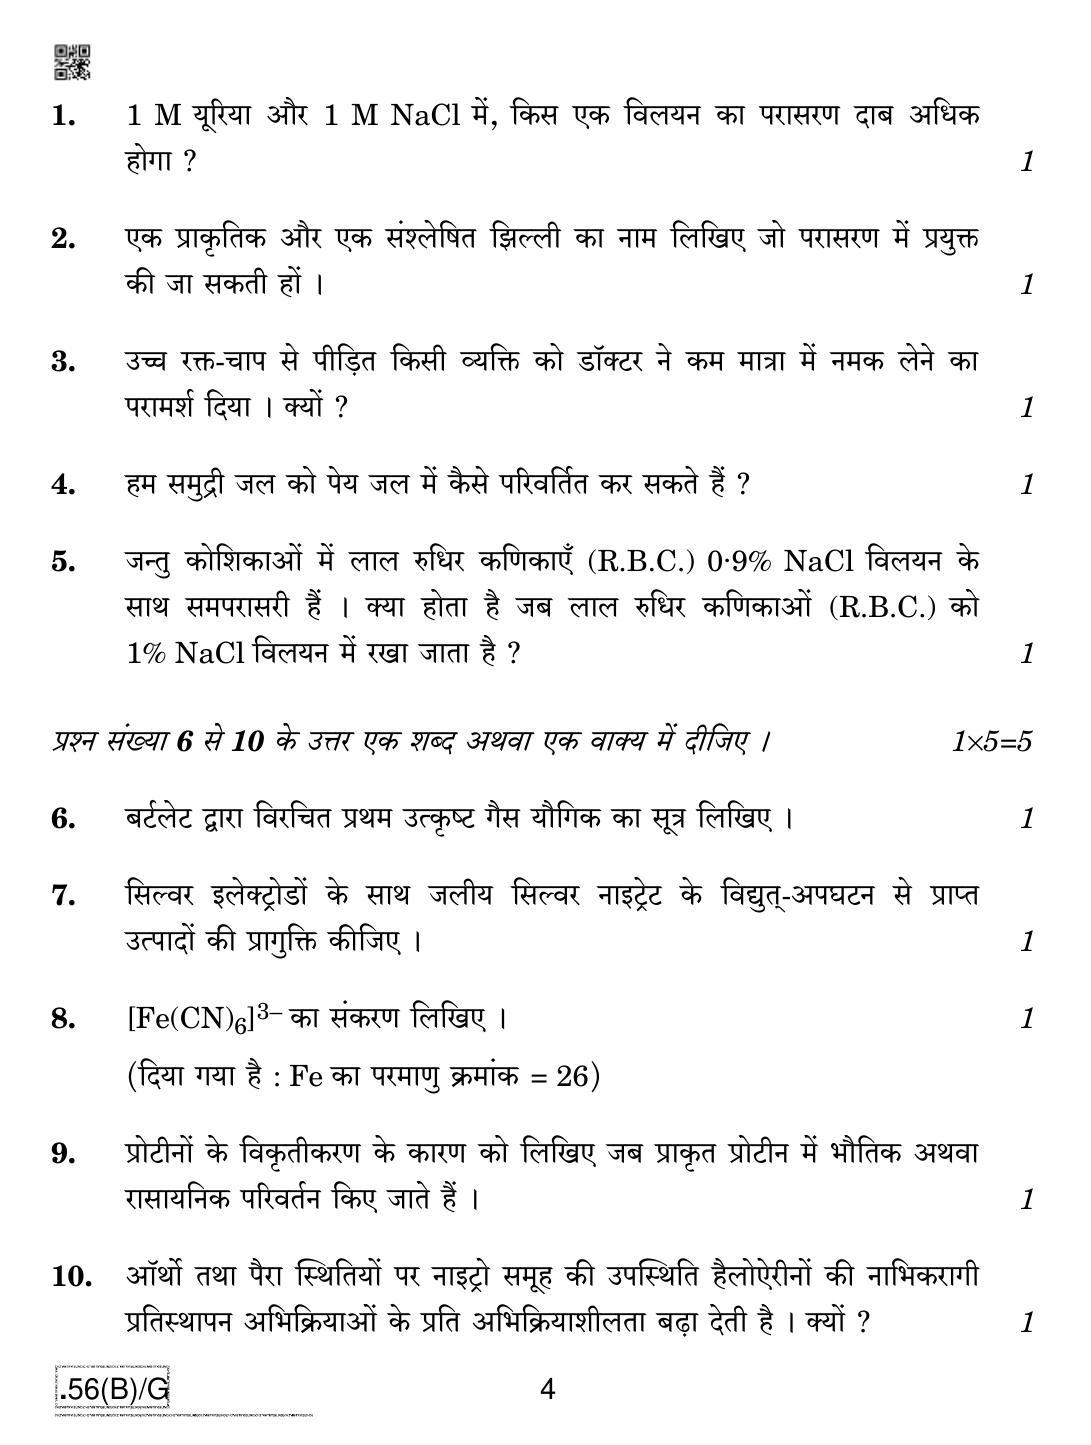 CBSE Class 12 56(B)-C - Chemistry For Blind Candidates 2020 Compartment Question Paper - Page 4